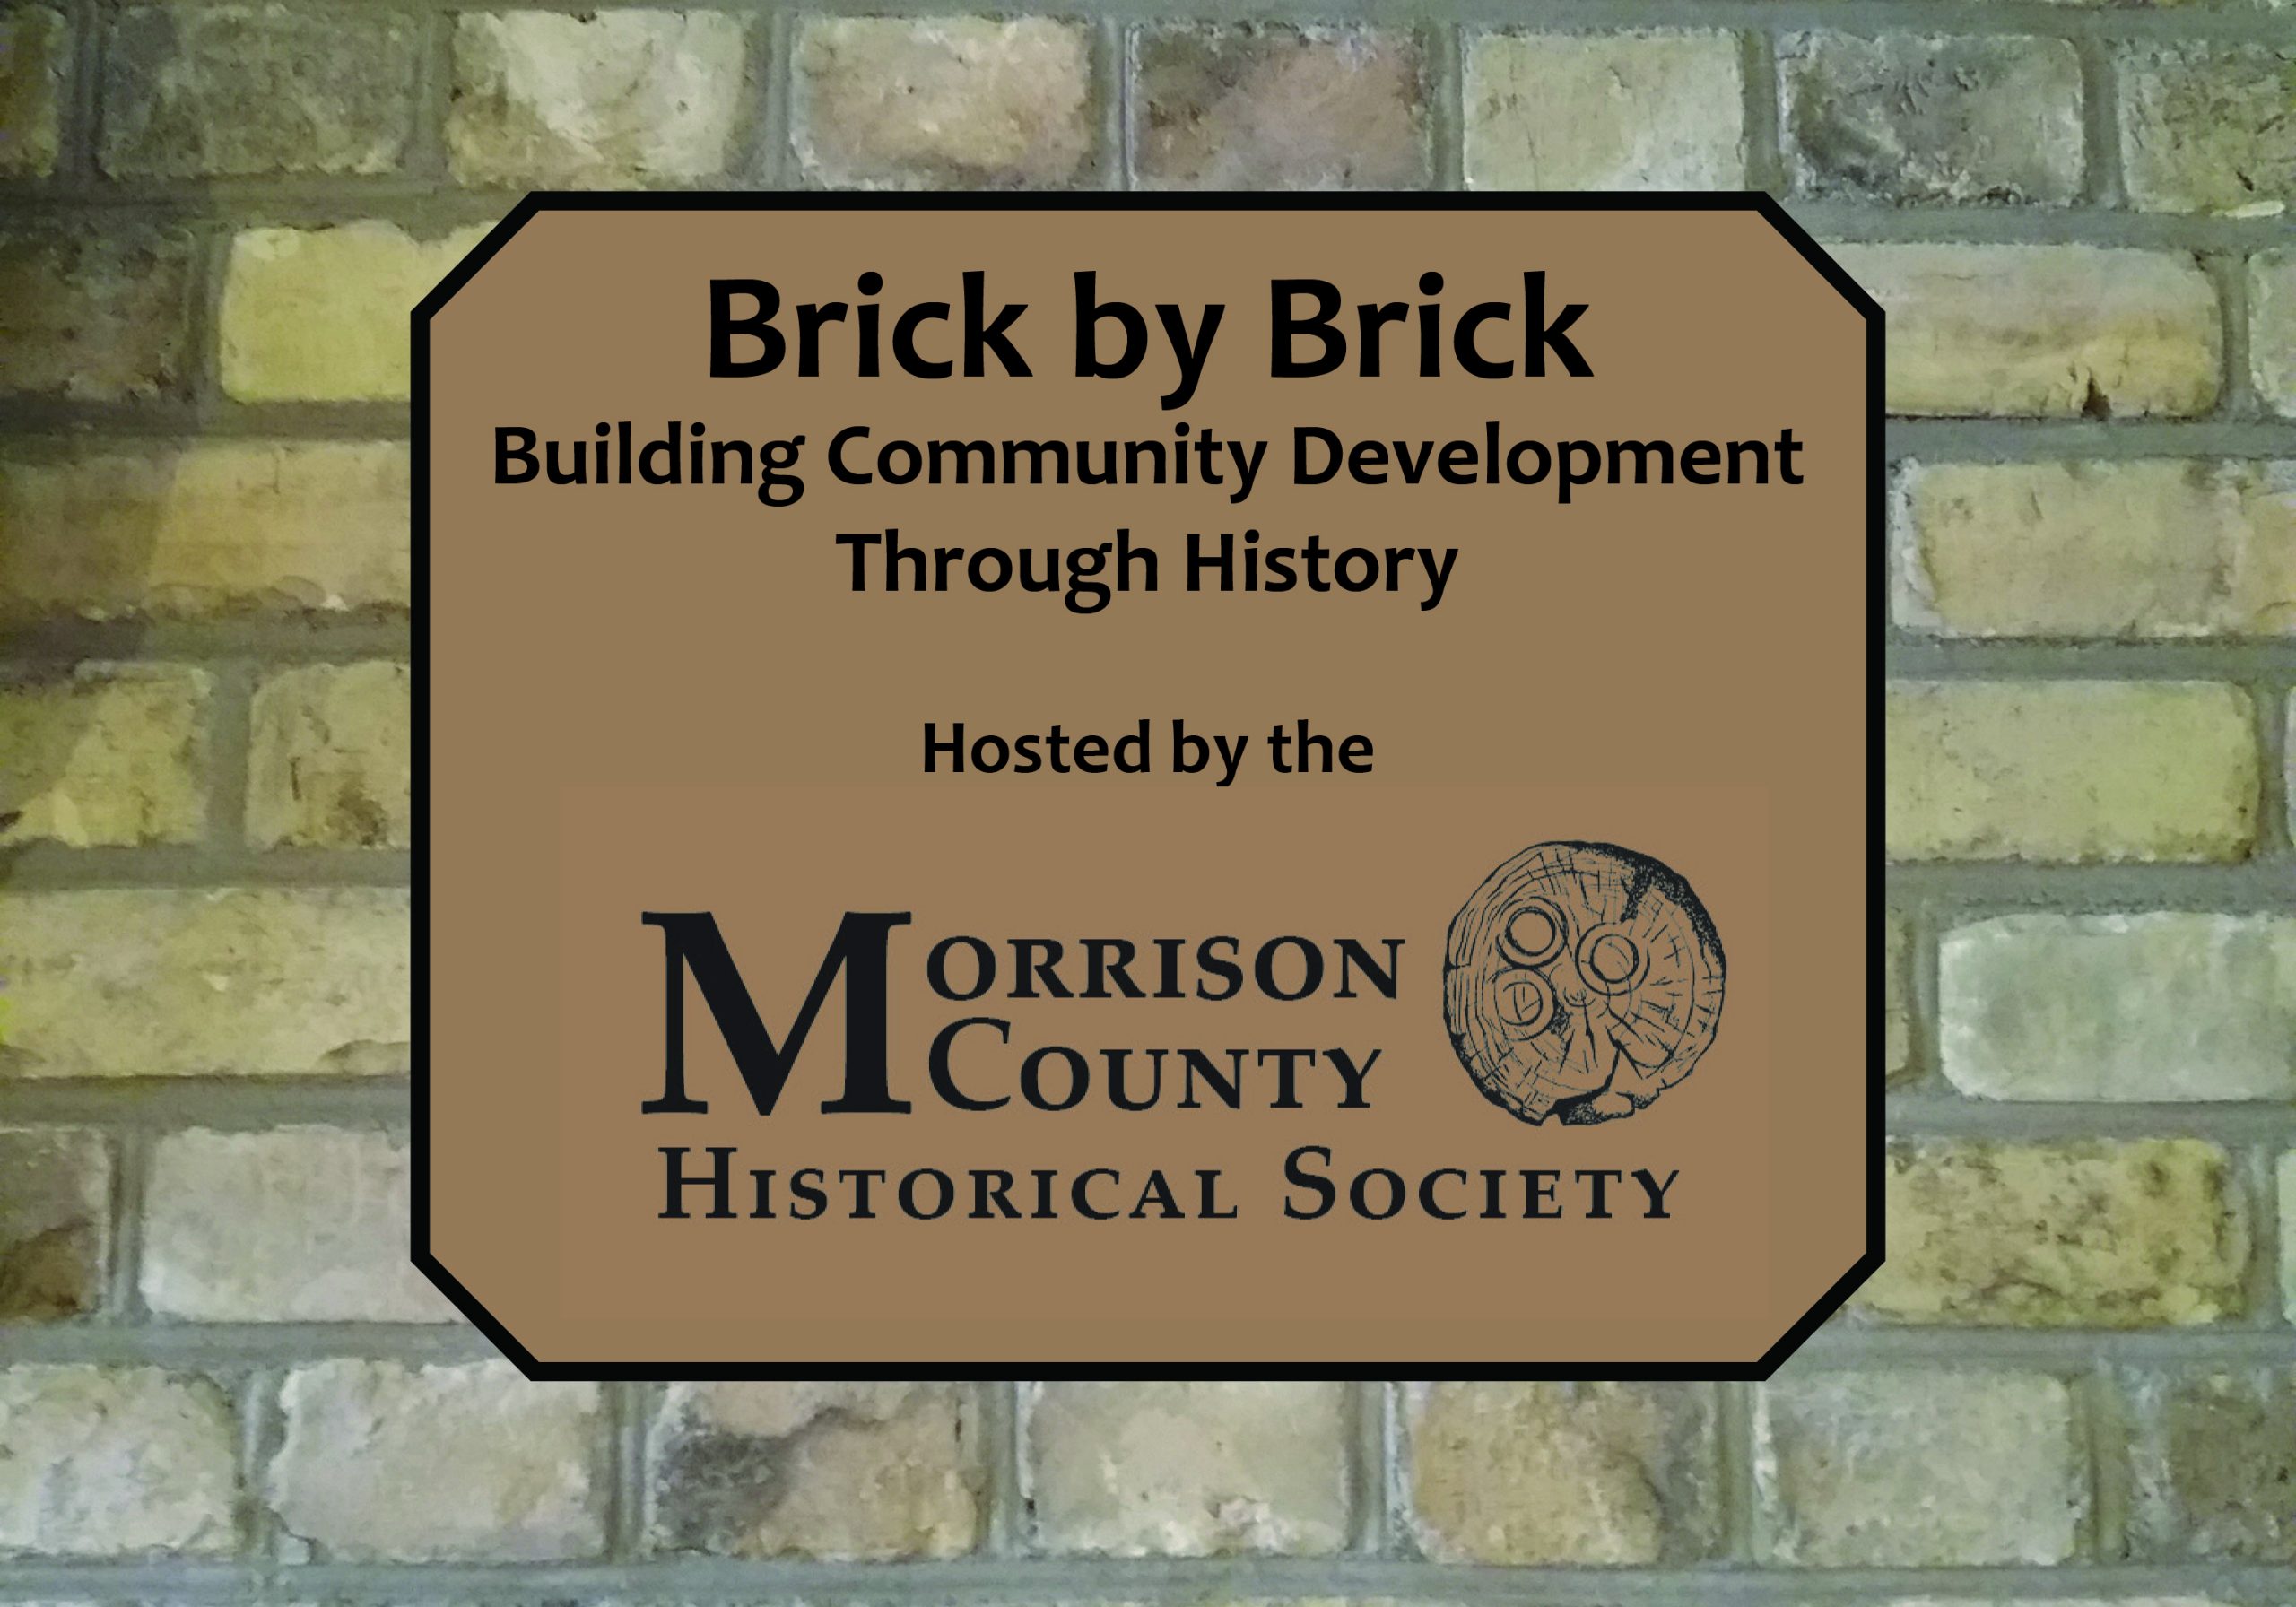 Brick by Brick: Building Community Development Through History, hosted by the Morrison County Historical Society, 2021.